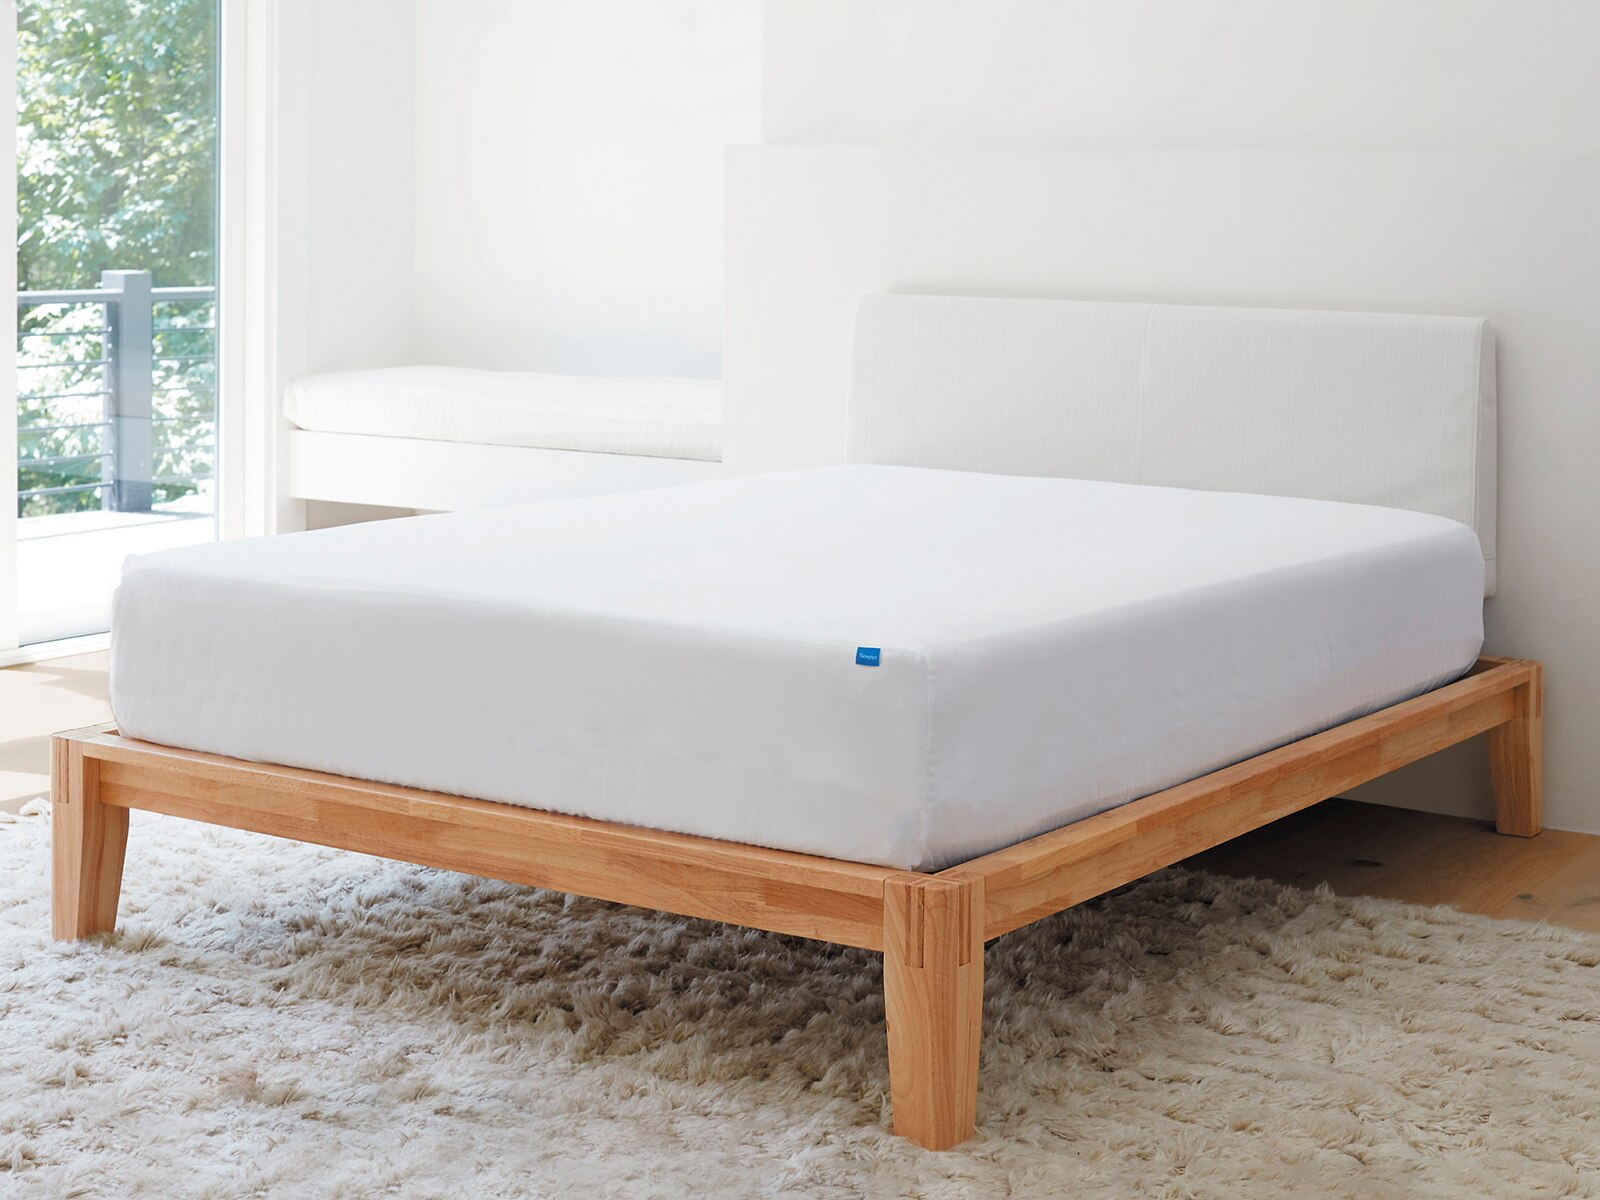 What is a Mattress Protector?